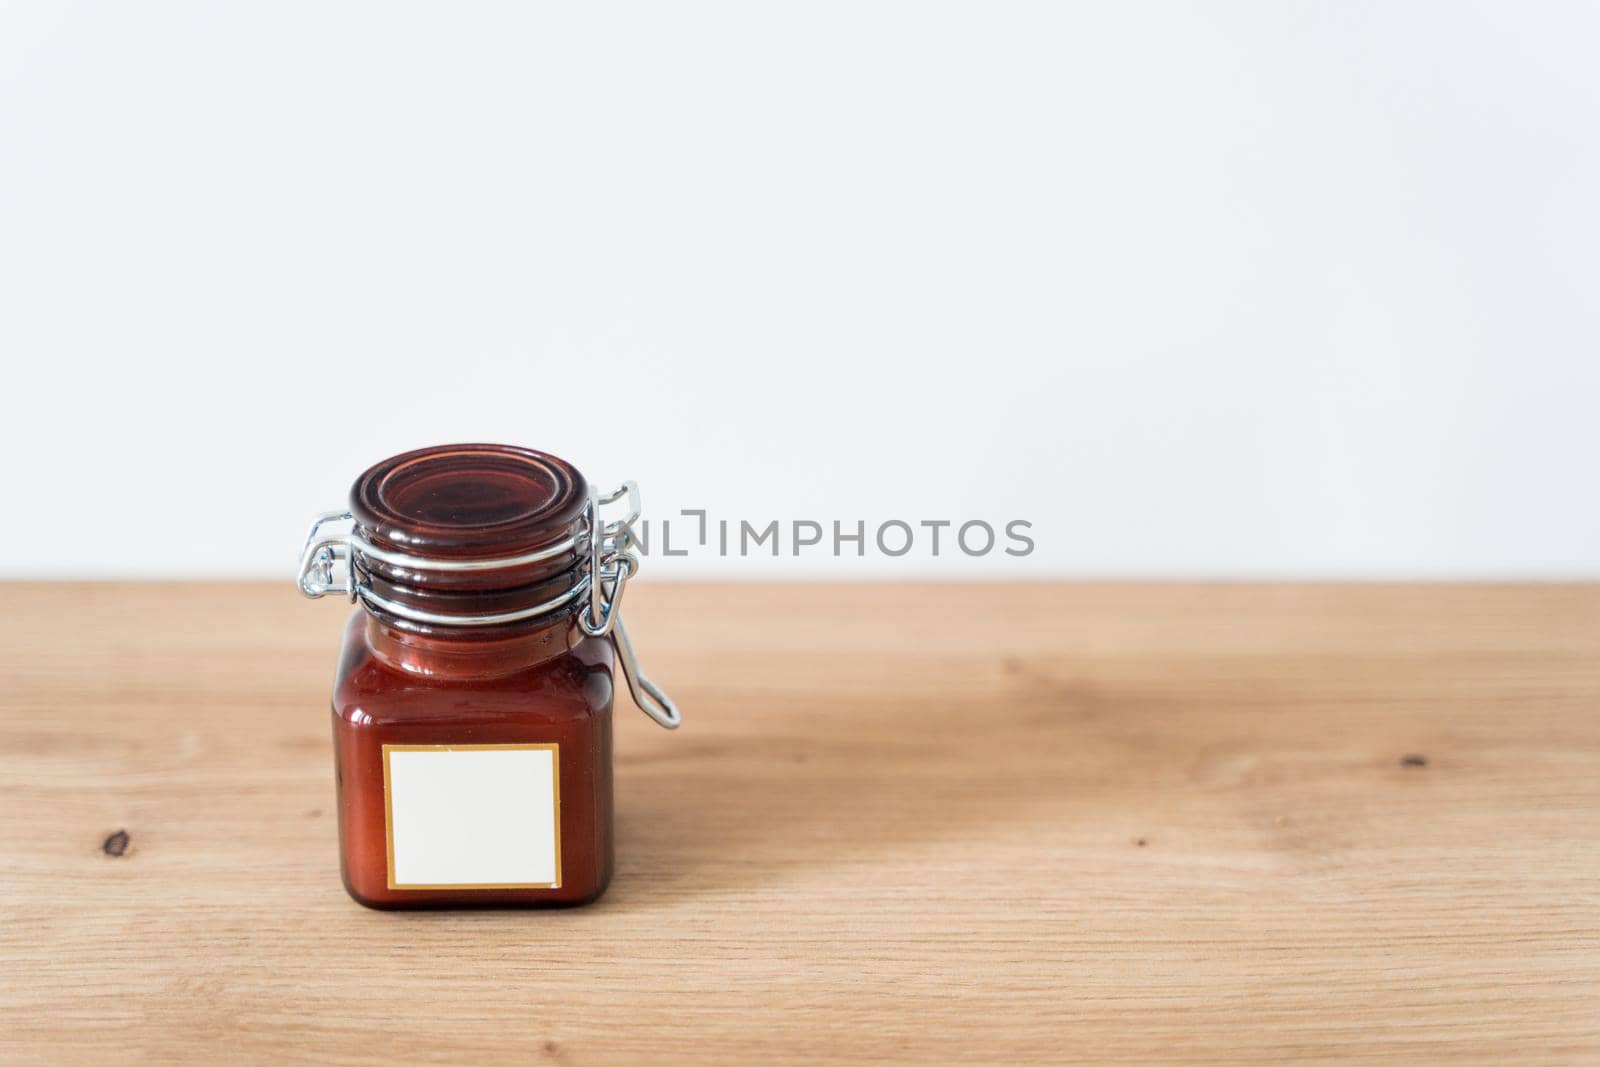 Scented candle in a glass jar on a white background. Glass jar with aromatic candle. High quality photo